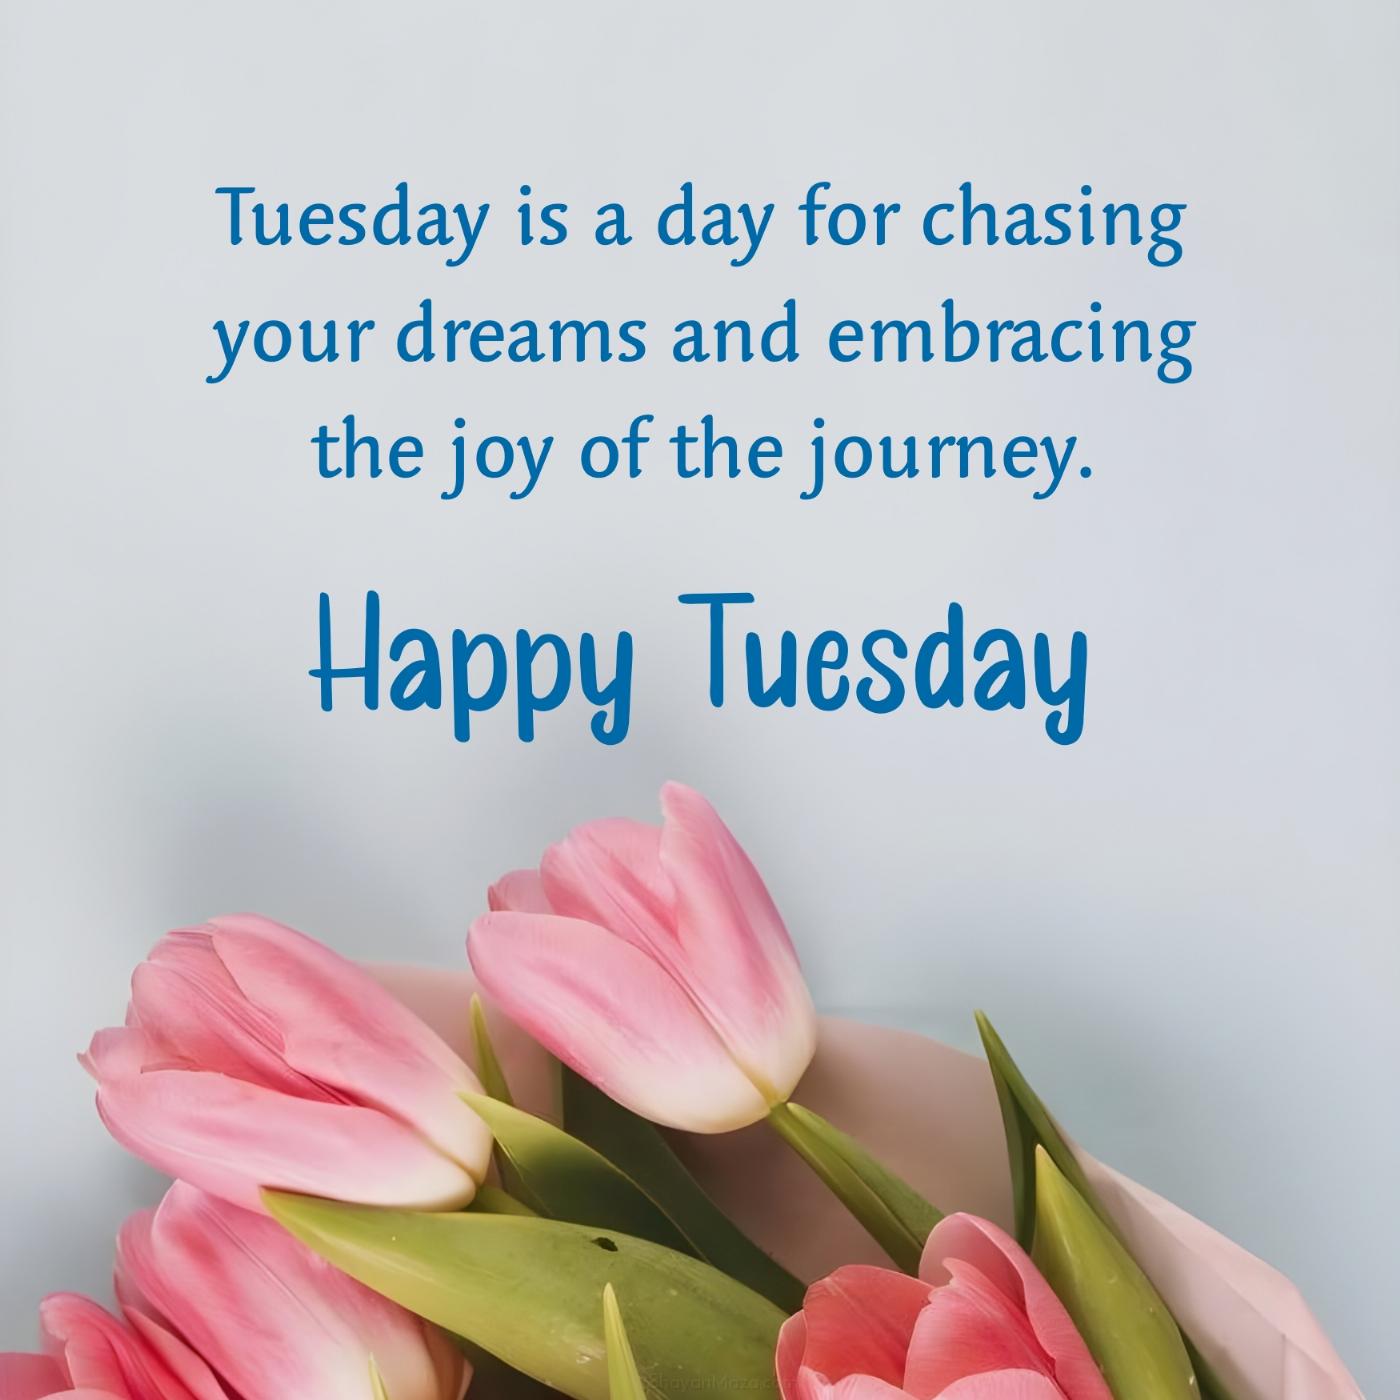 Tuesday is a day for chasing your dreams and embracing the joy